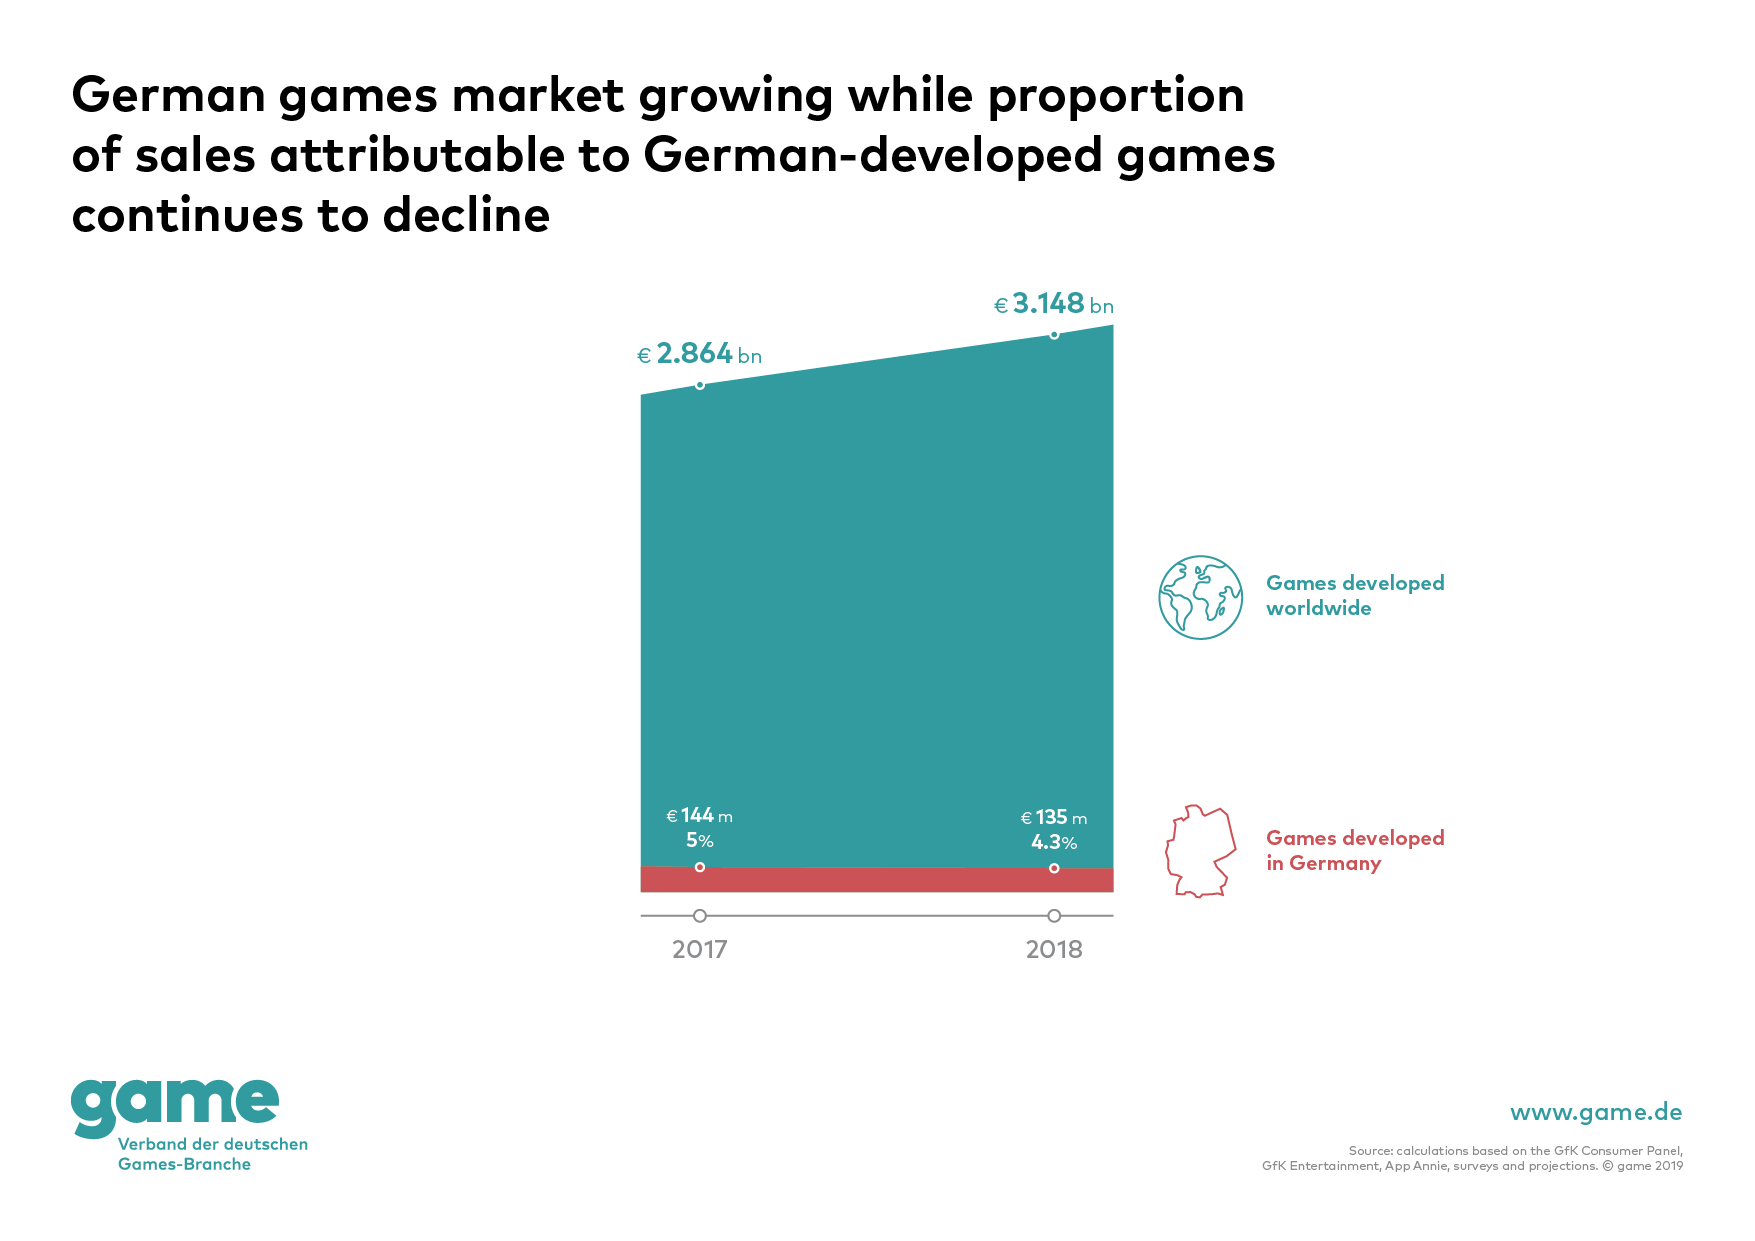 Revenue shares of German game developments in the German games market 2018